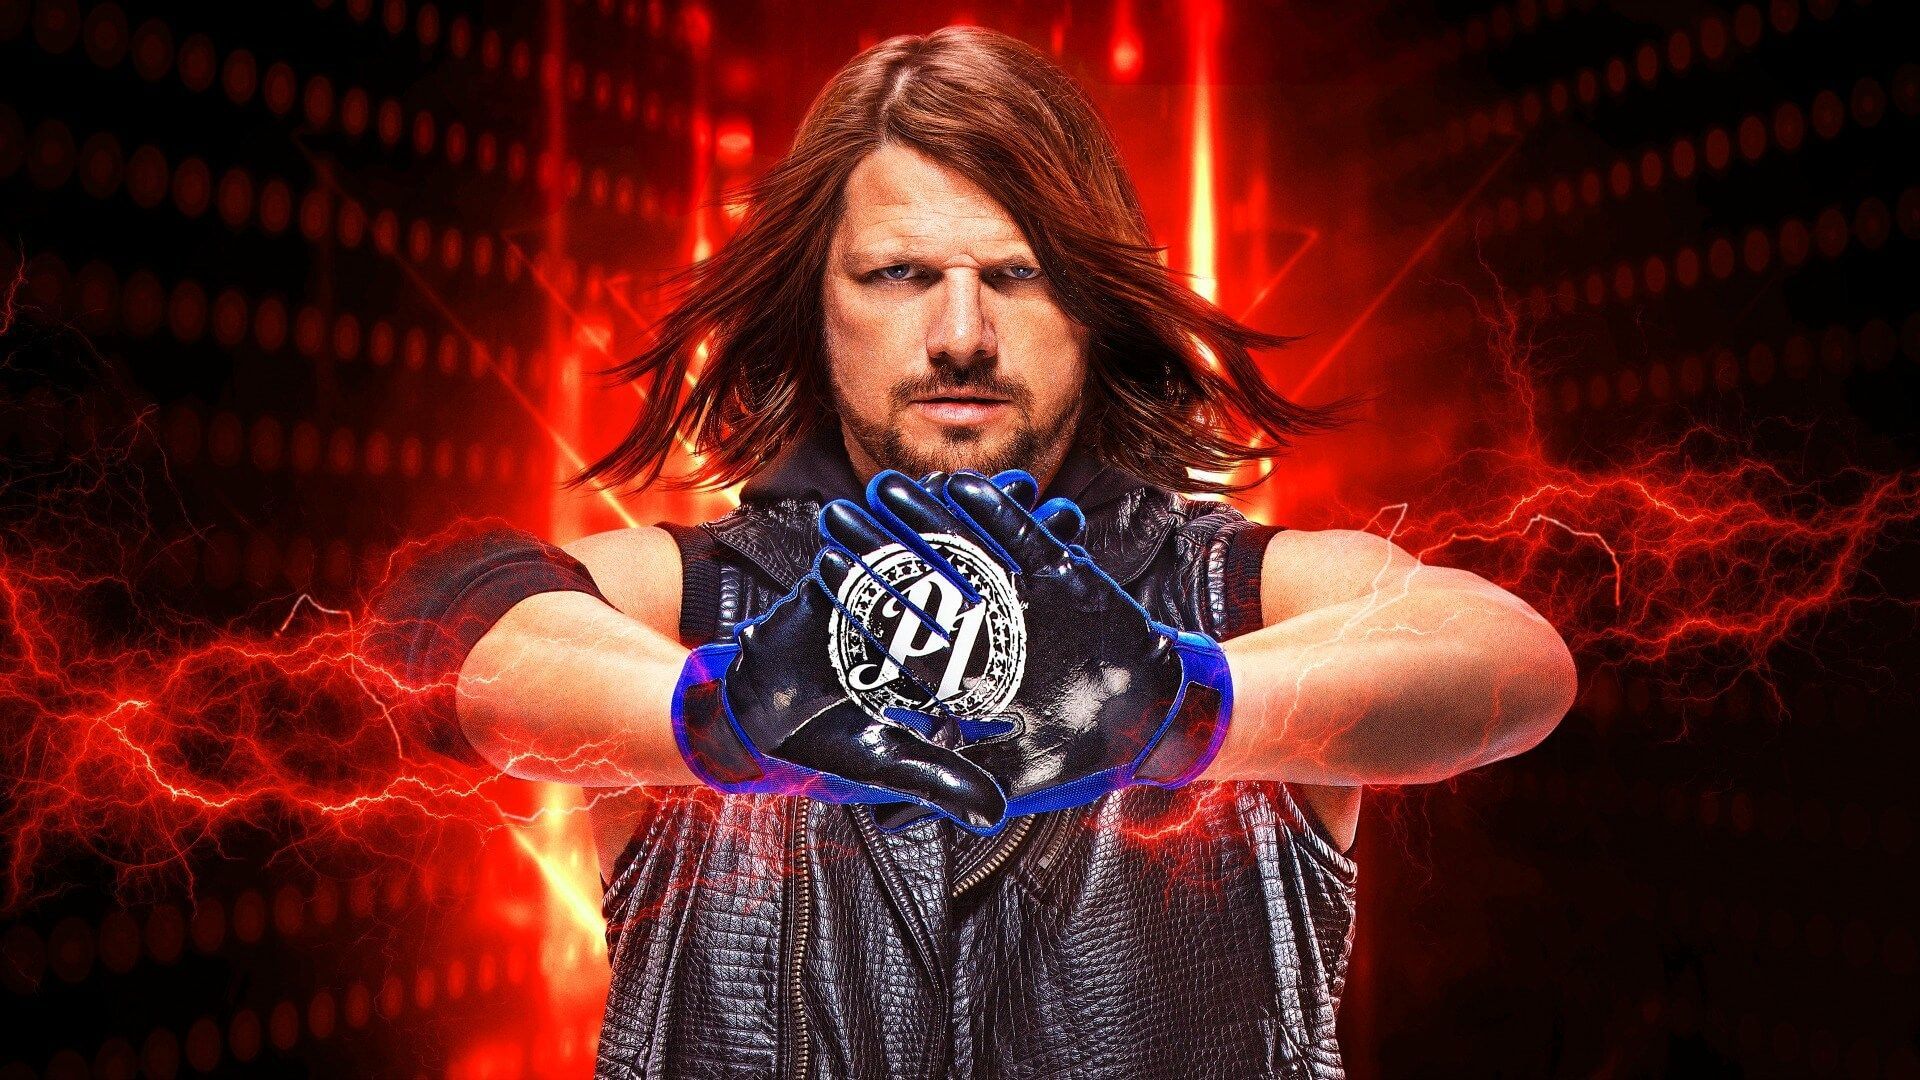 WWE 2K19 Cover Superstar AJ Styles Issues International Challenge for Potential One Million Dollar Payday